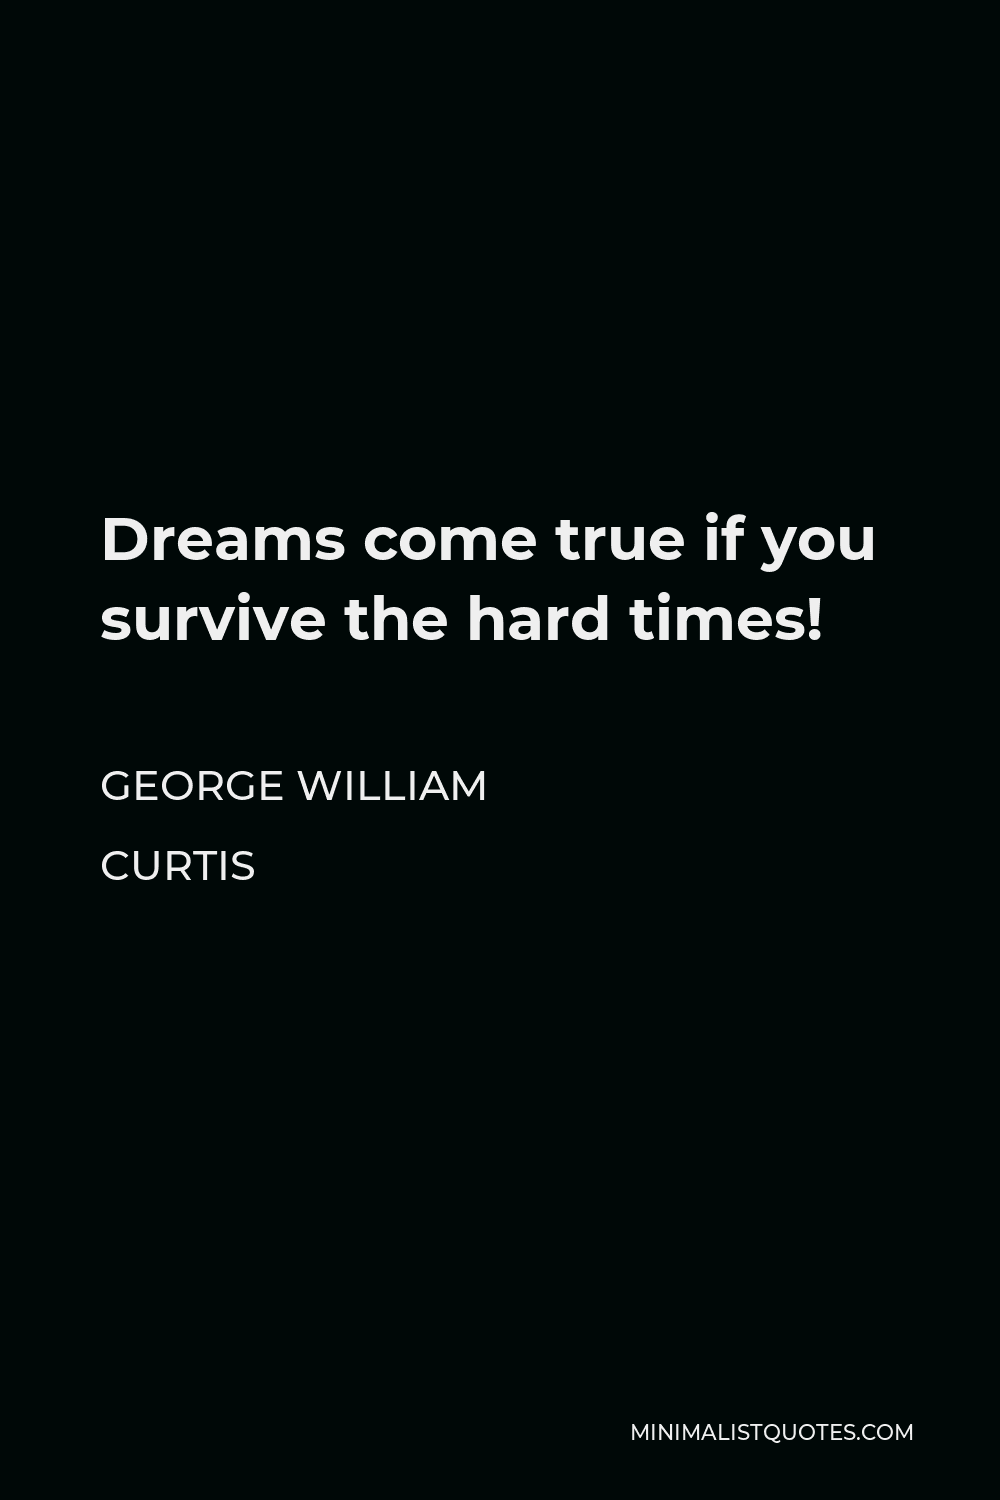 George William Curtis Quote - Dreams come true if you survive the hard times!